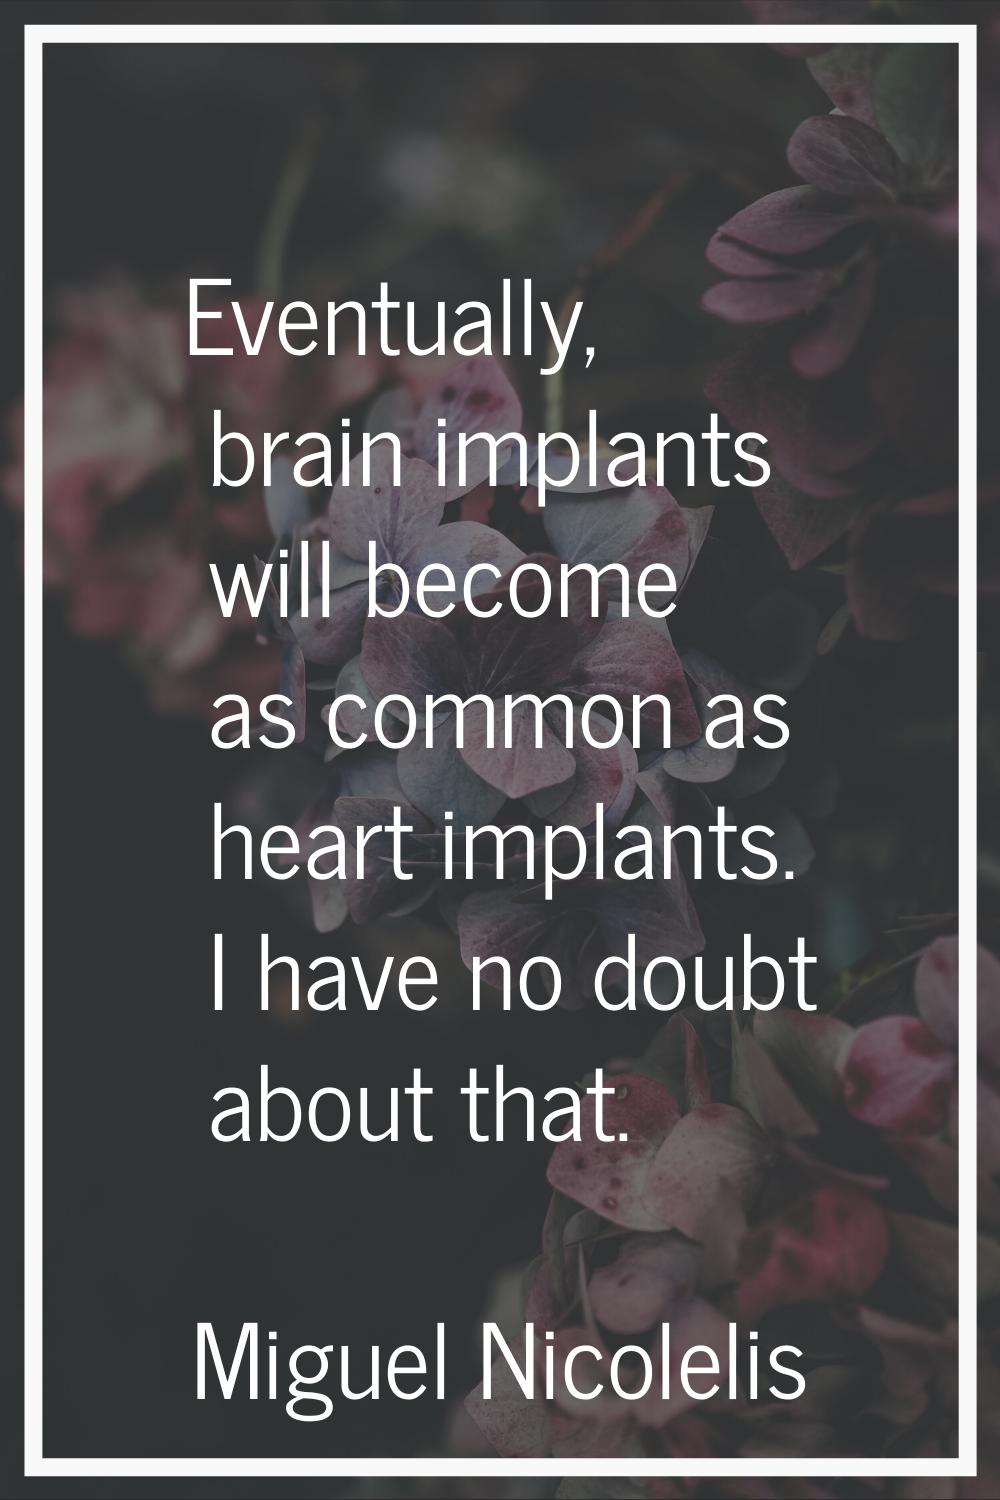 Eventually, brain implants will become as common as heart implants. I have no doubt about that.